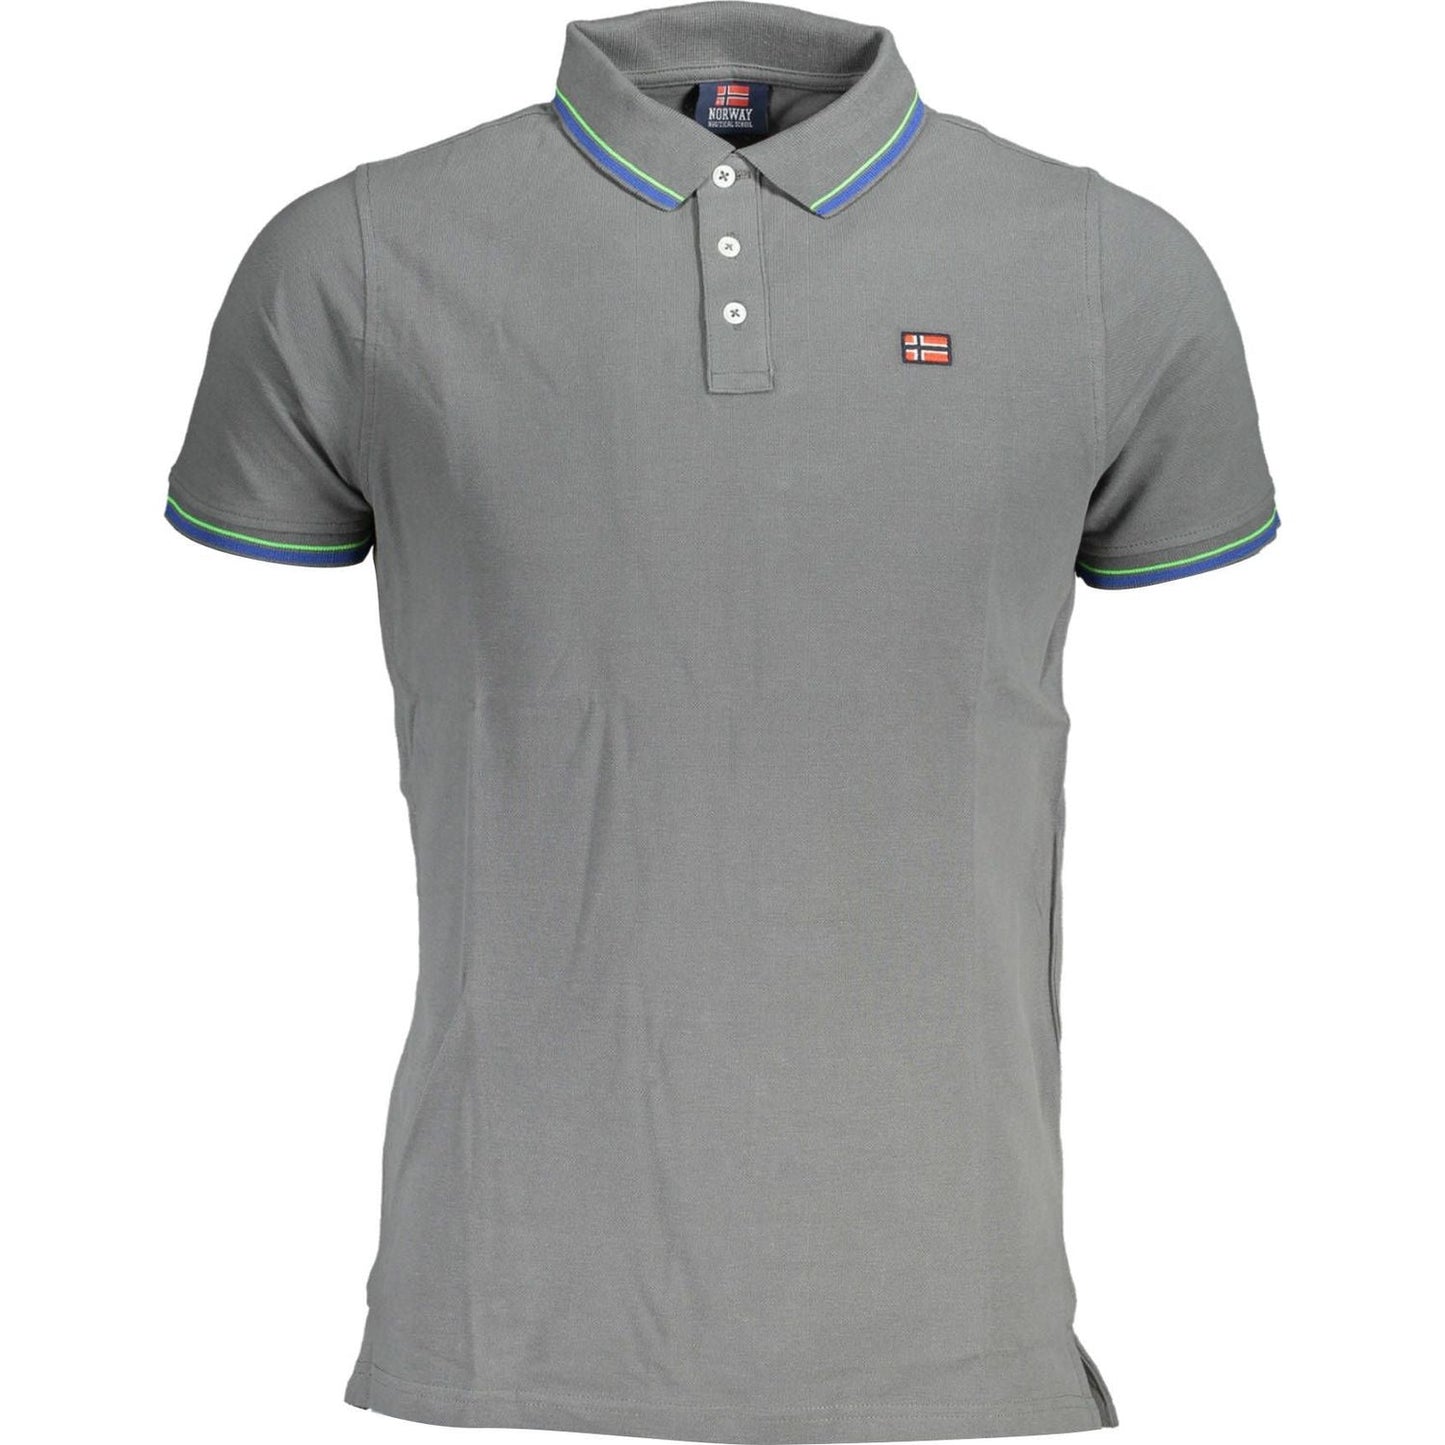 Norway 1963 Elegant Gray Cotton Polo with Contrasting Details elegant-gray-cotton-polo-with-contrasting-details-1